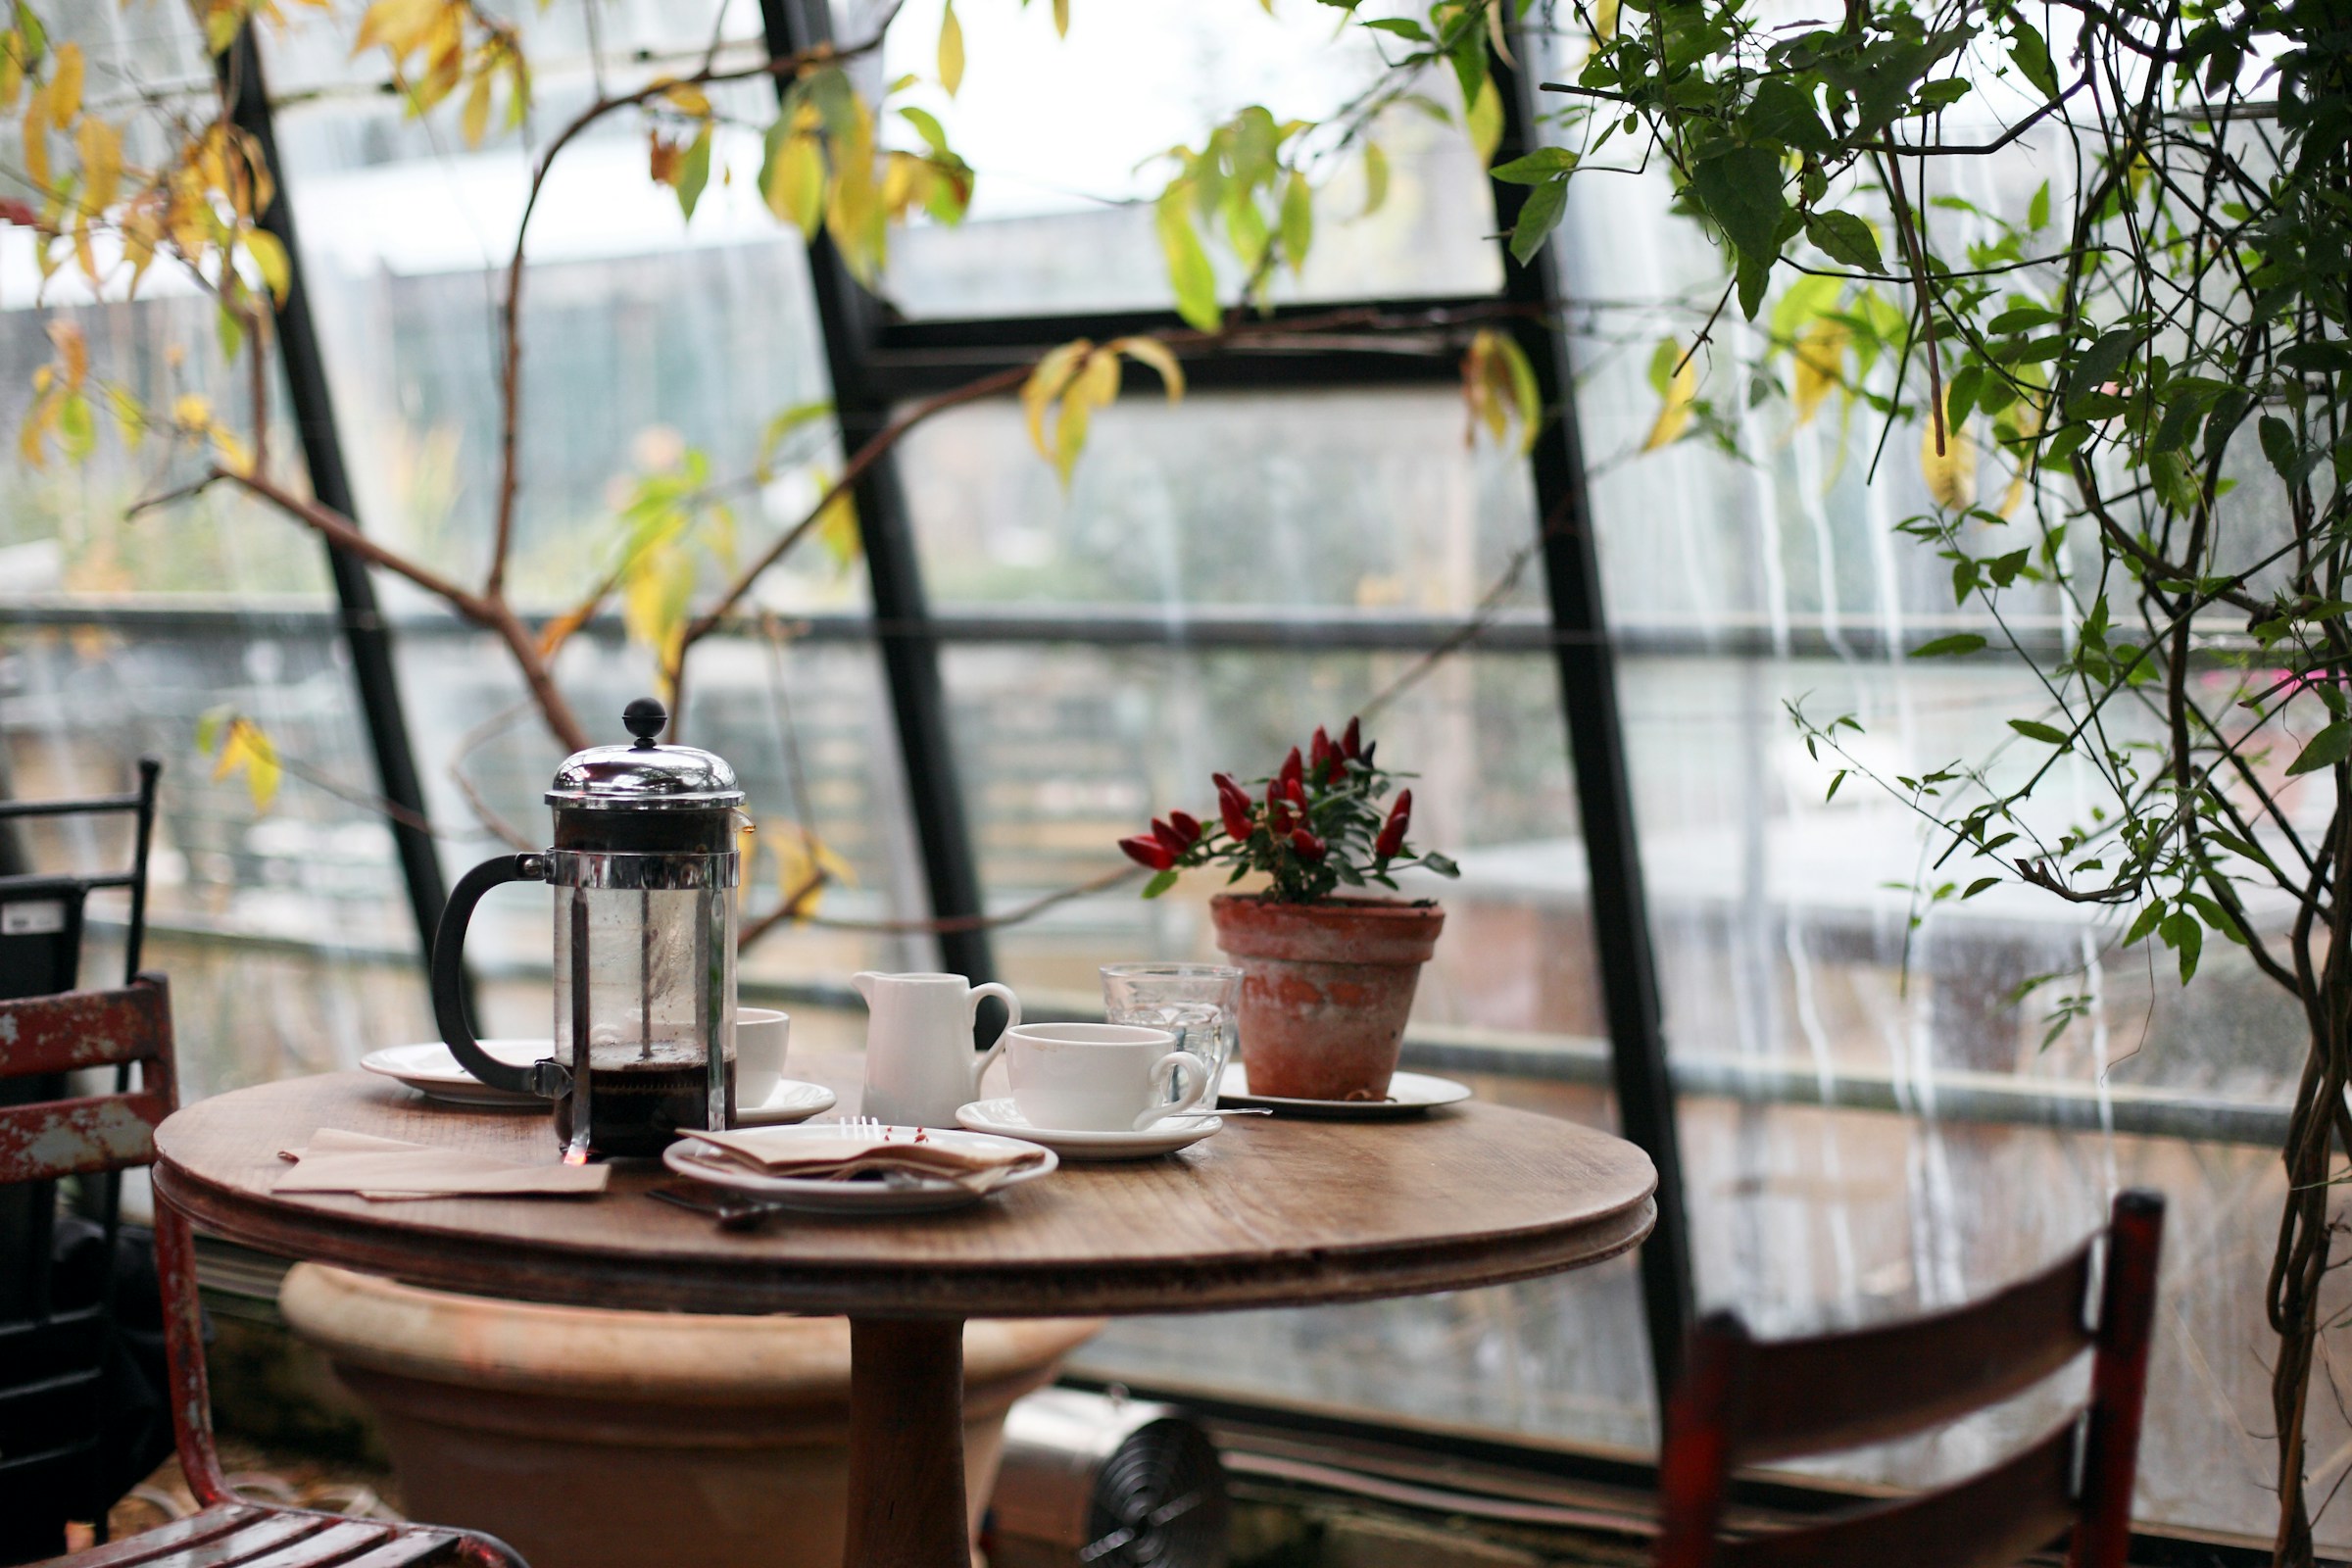 A table at a coffee shop | Source: Unsplash